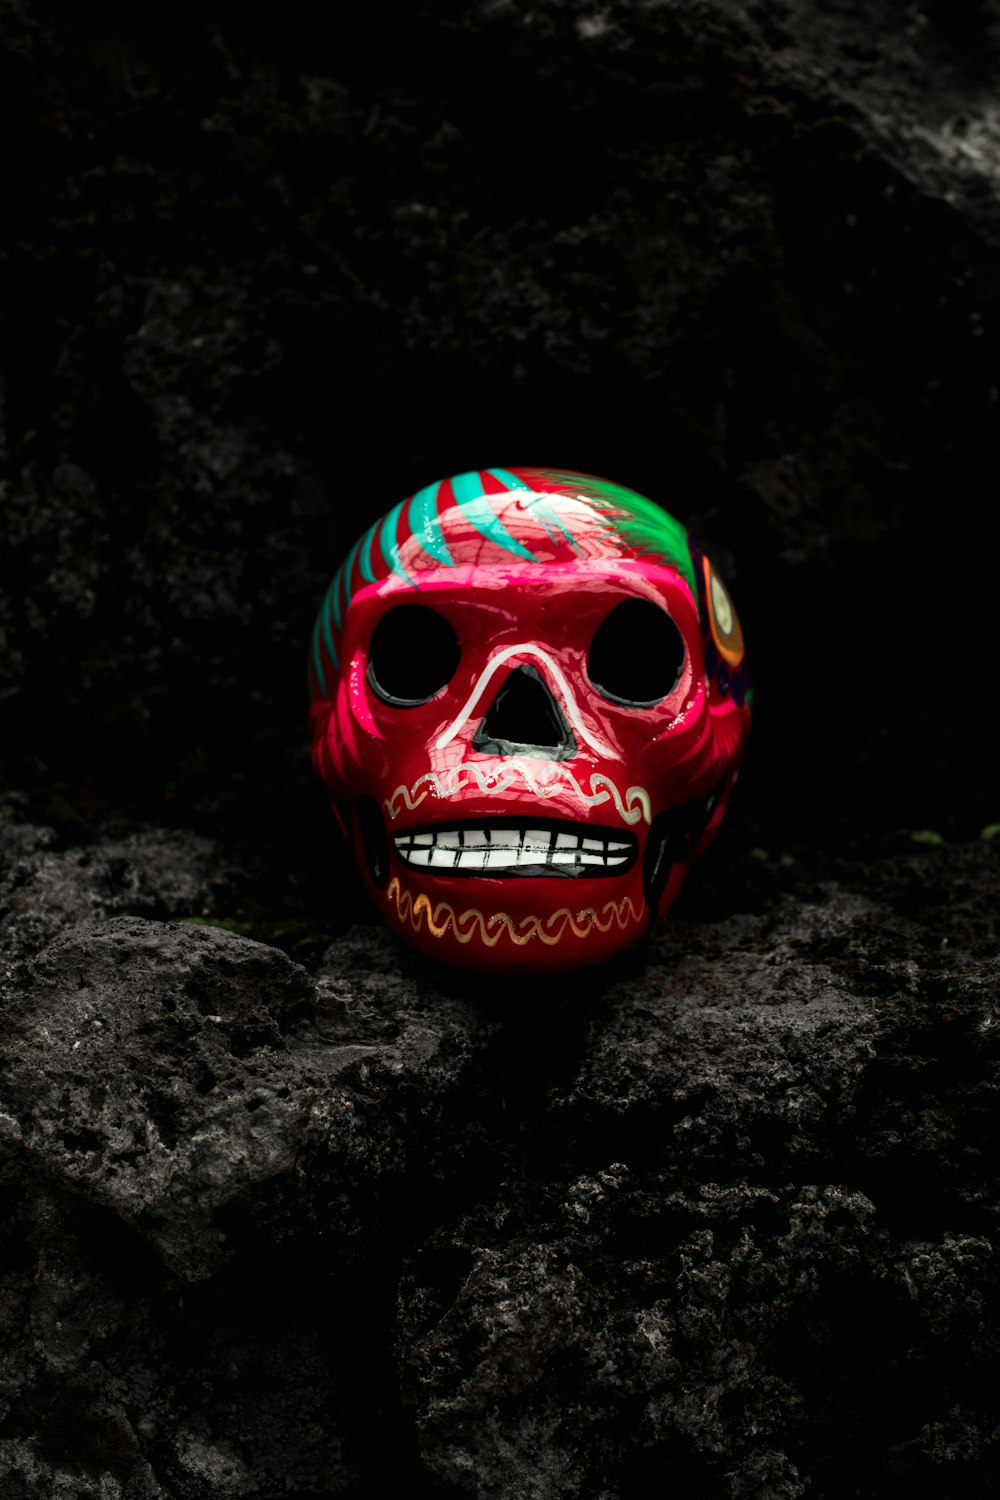 red and green ceramic skull ornament on black rock